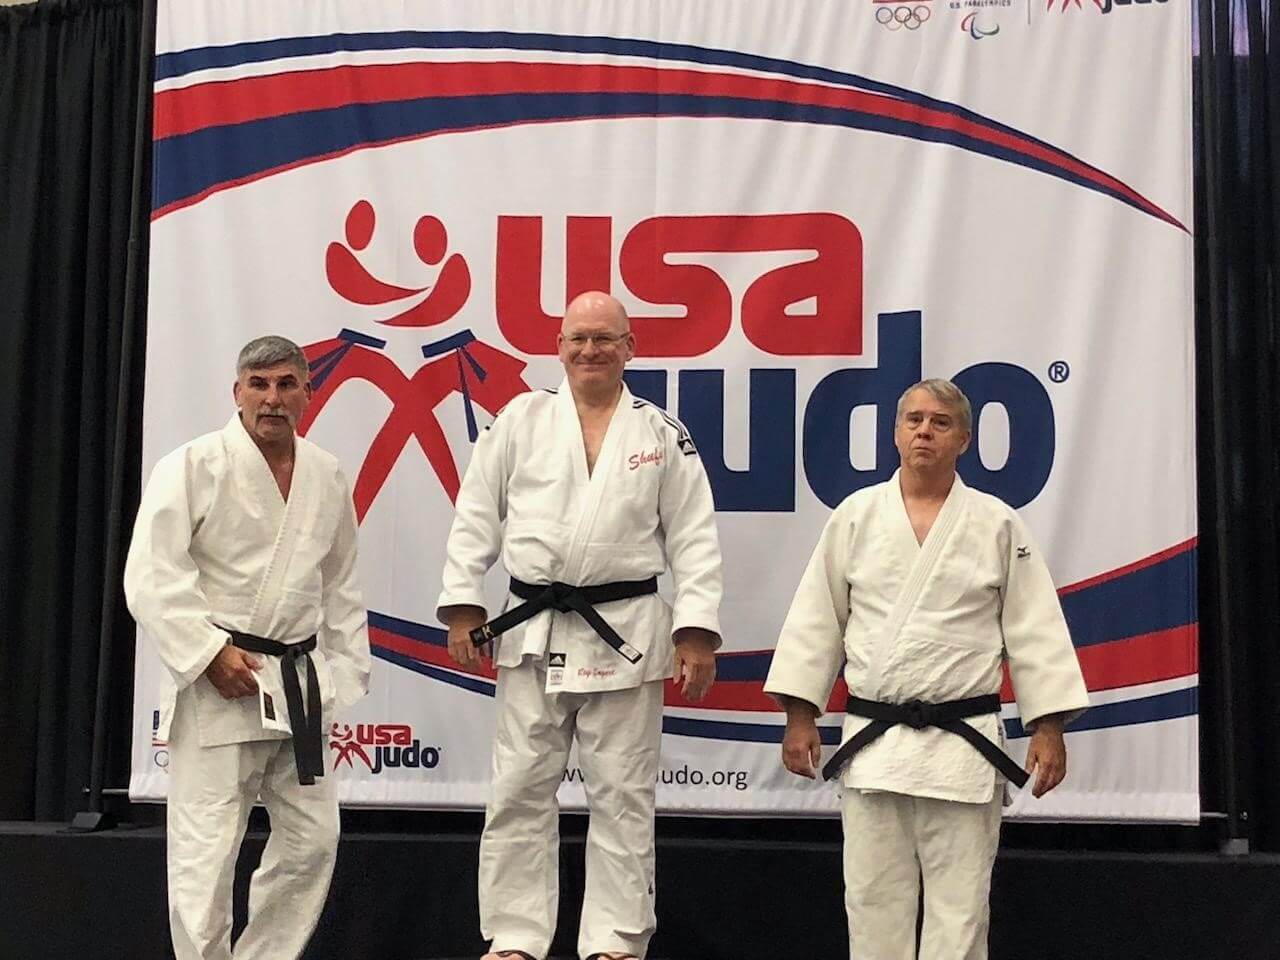 2018 Sr. National Masters (now Veterans) award stand picture